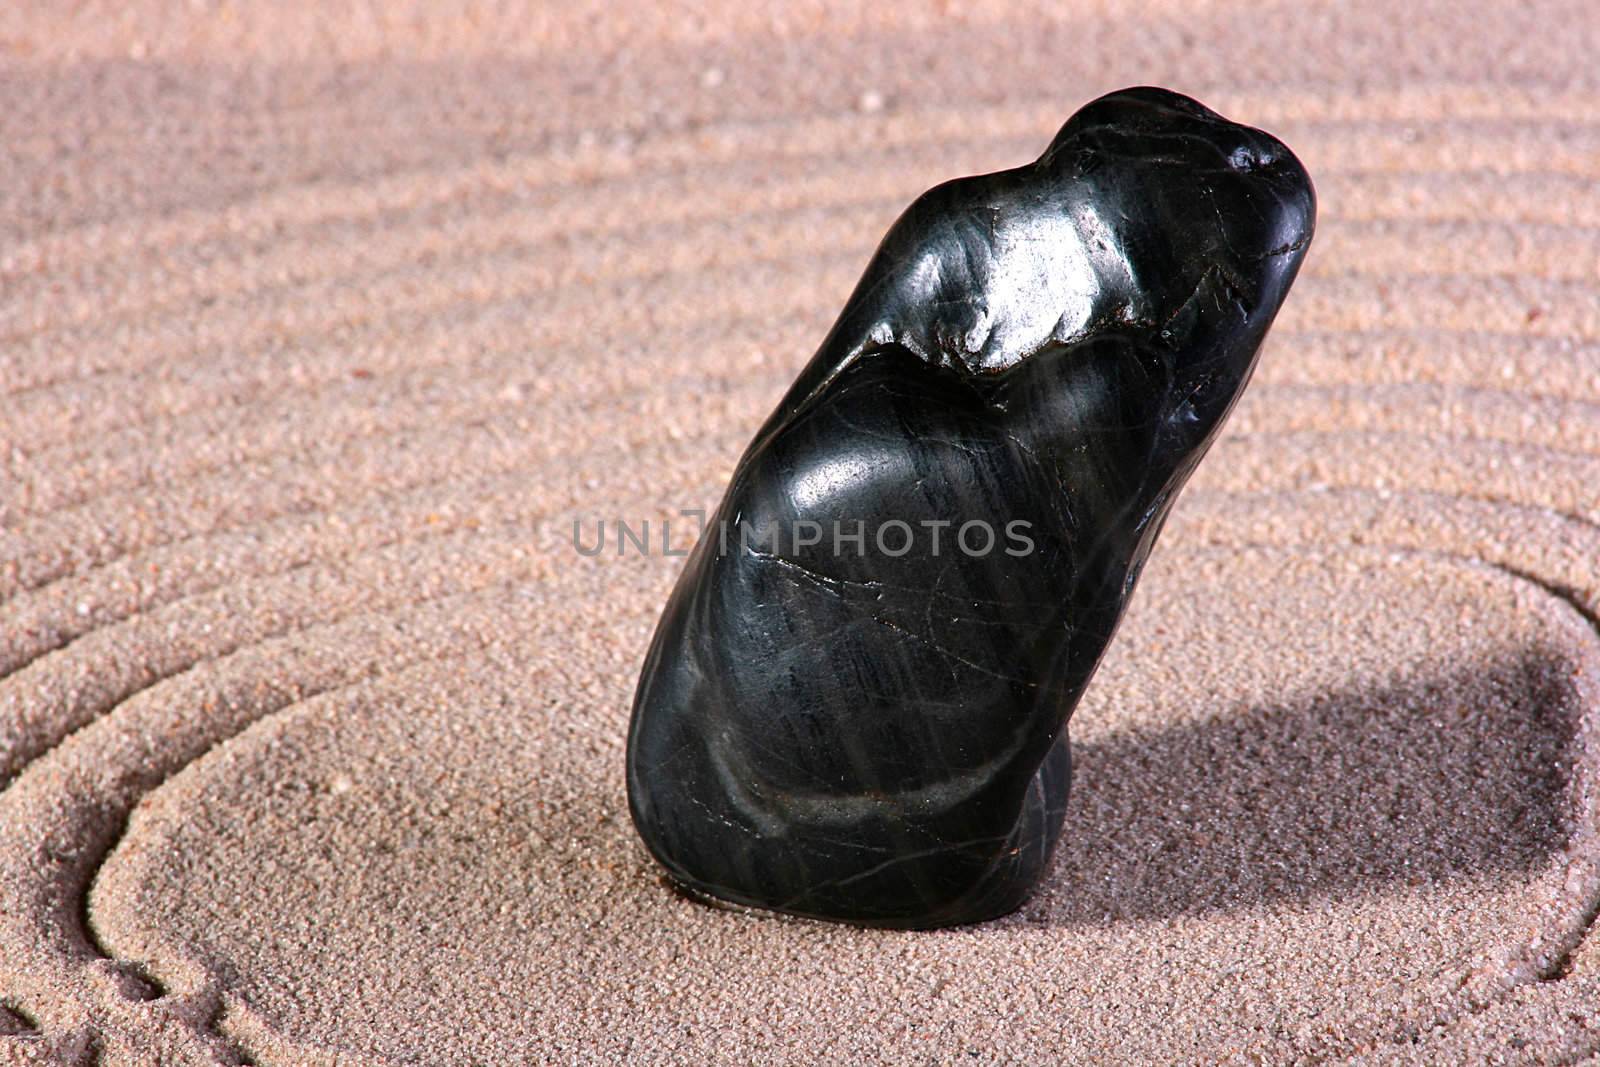 The black stone is on sand with the lined circles round a stone.